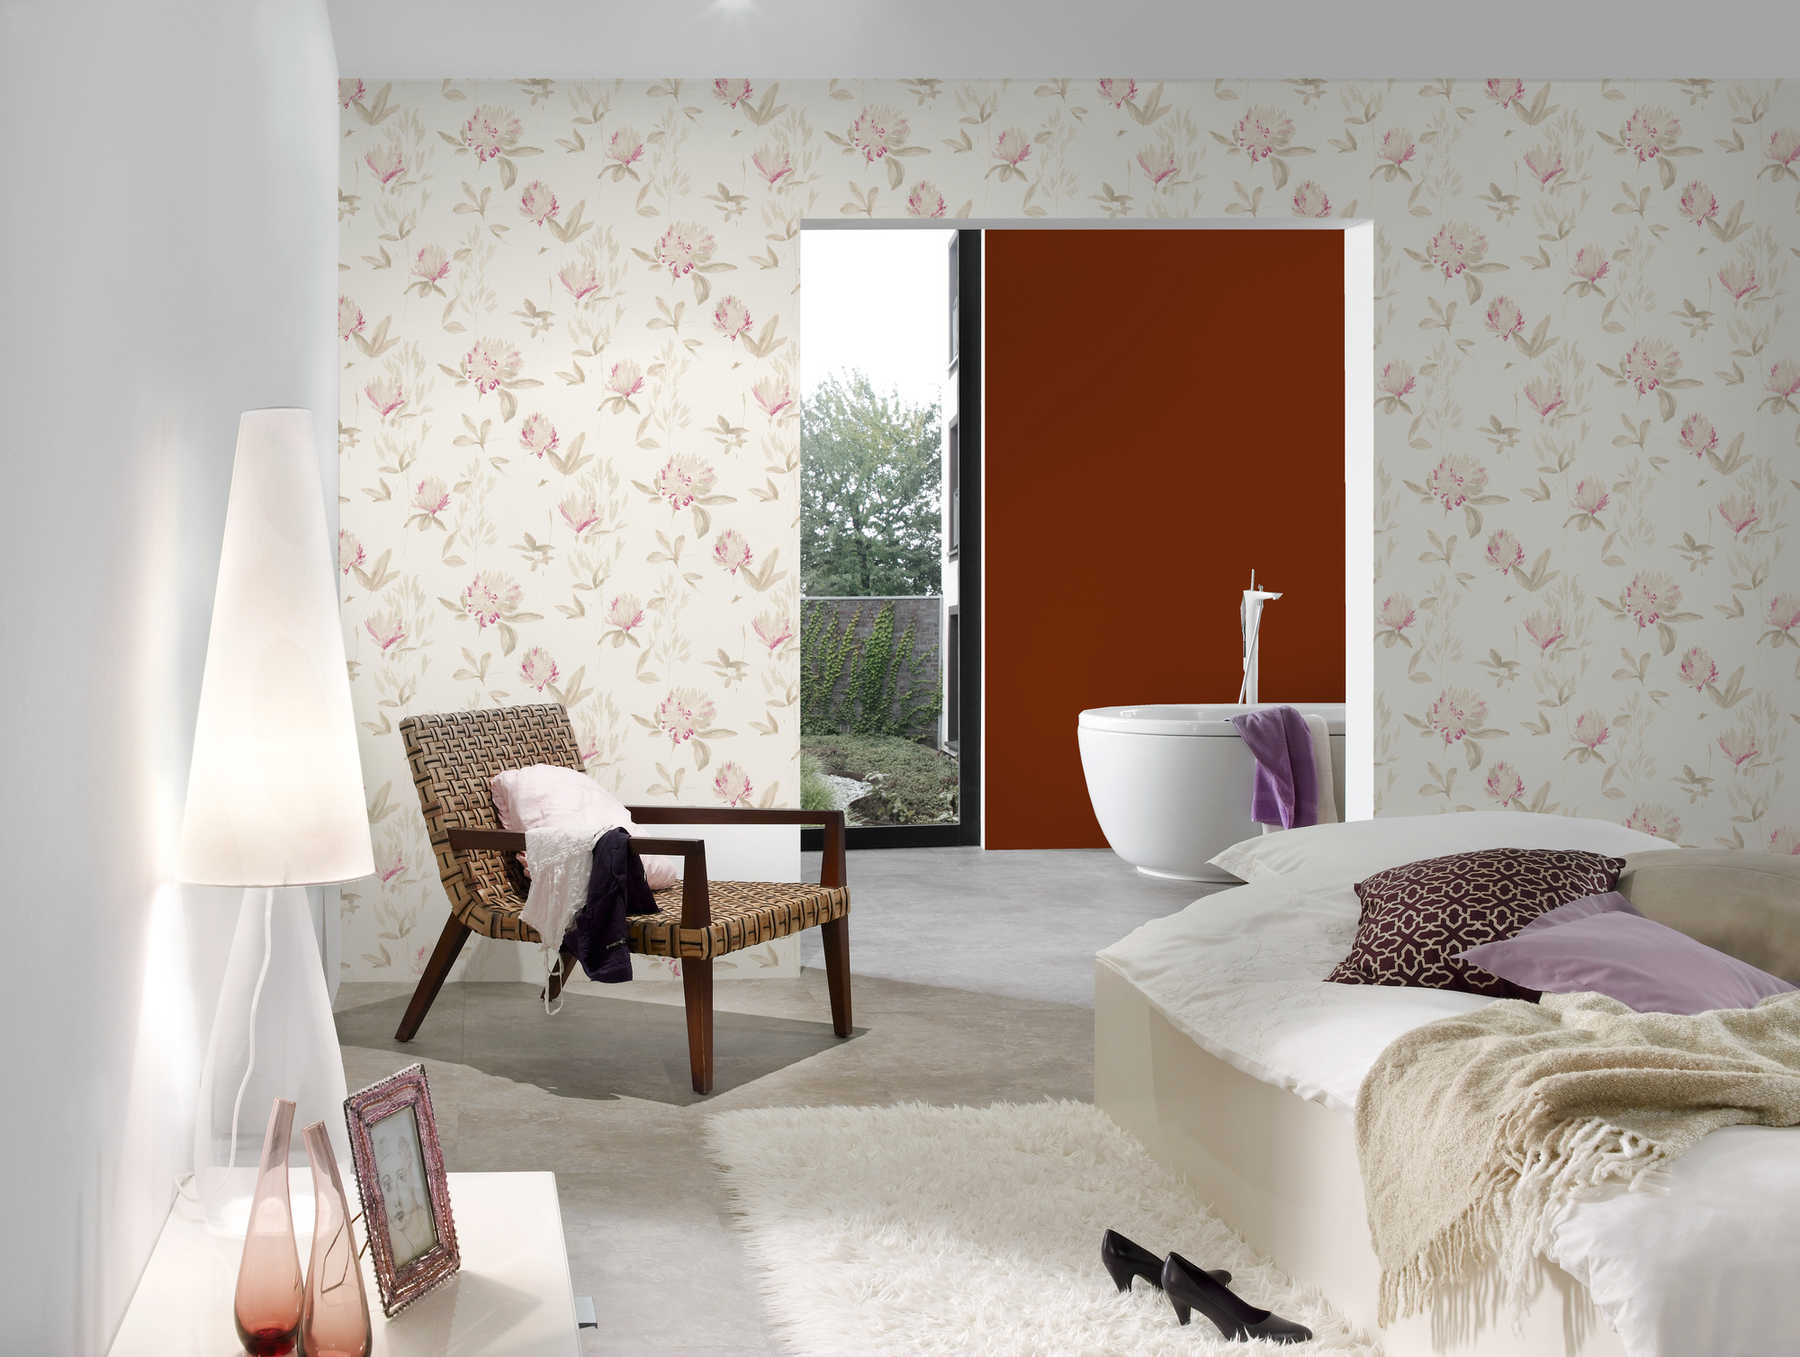             Abstract floral non-woven wallpaper with pink accents - beige, purple
        